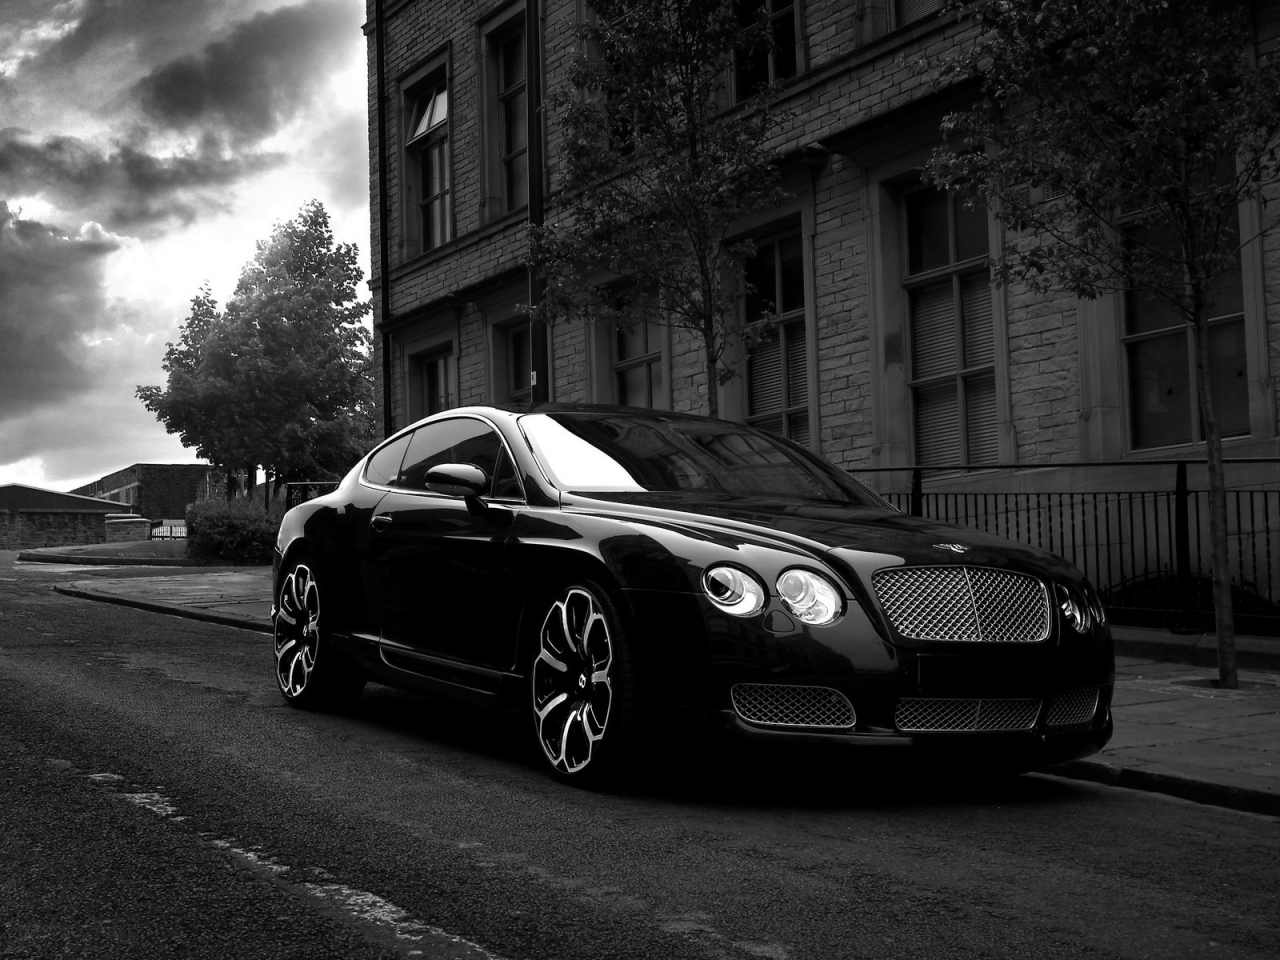 Bentley GTS Black Edition Project Kahn 2008 for 1280 x 960 resolution